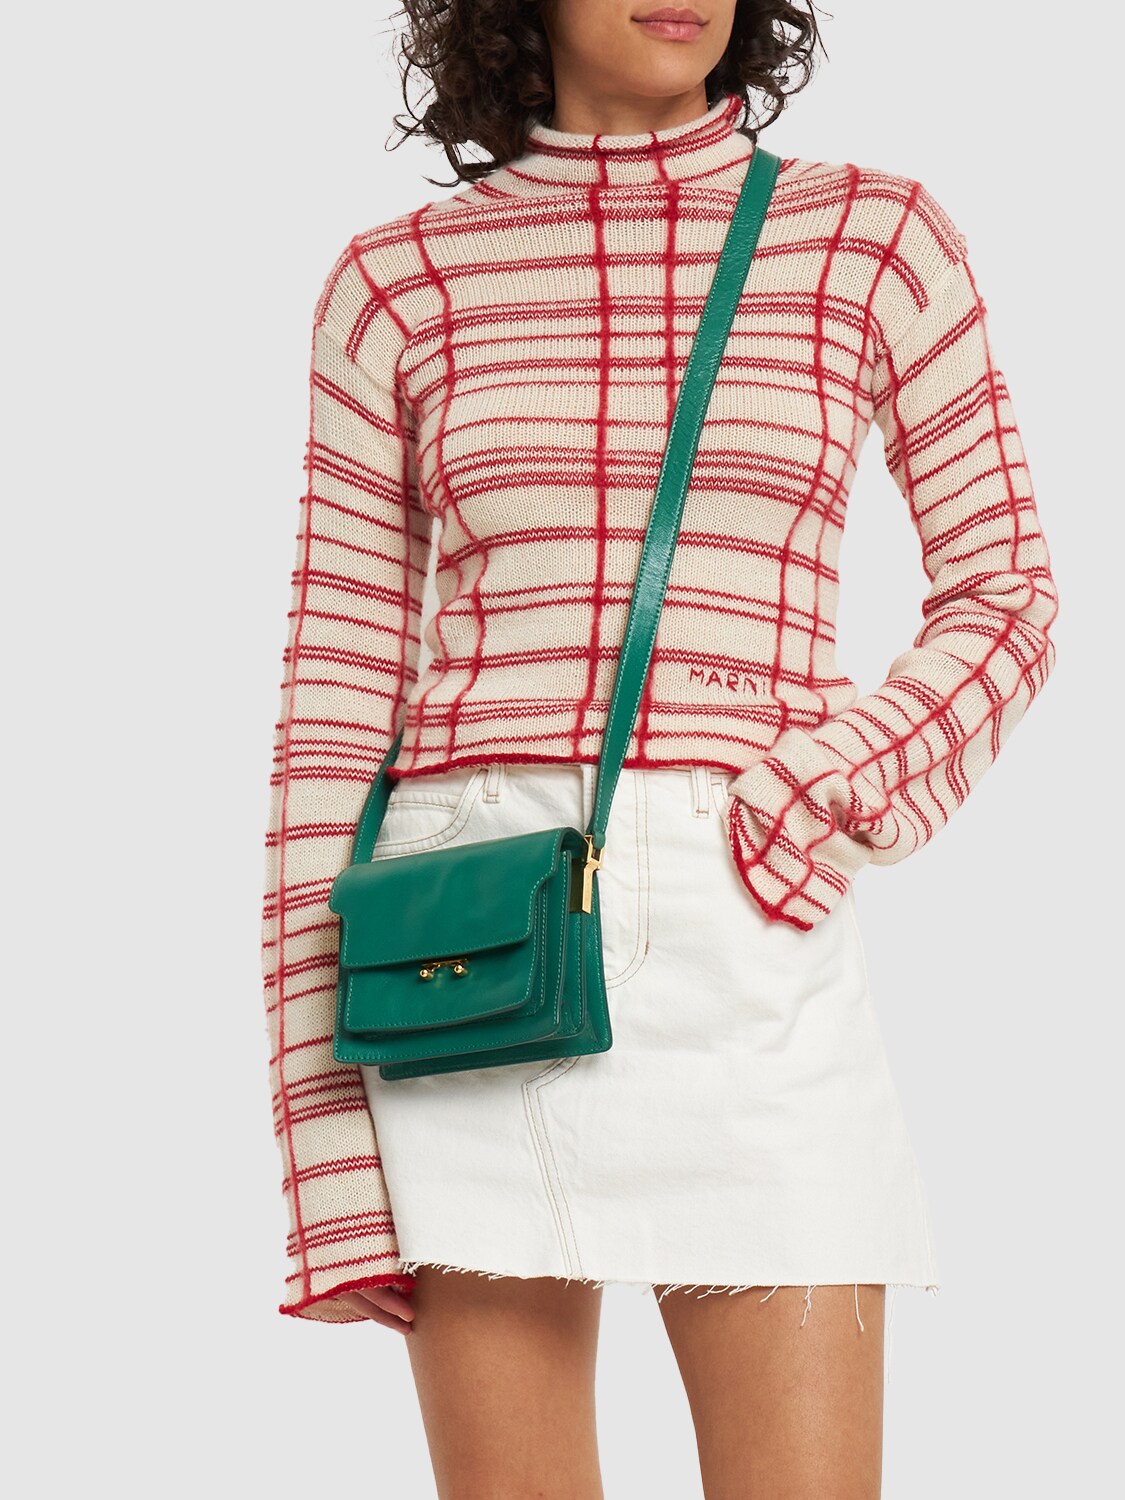 TRUNK SOFT mini bag in green and burgundy leather